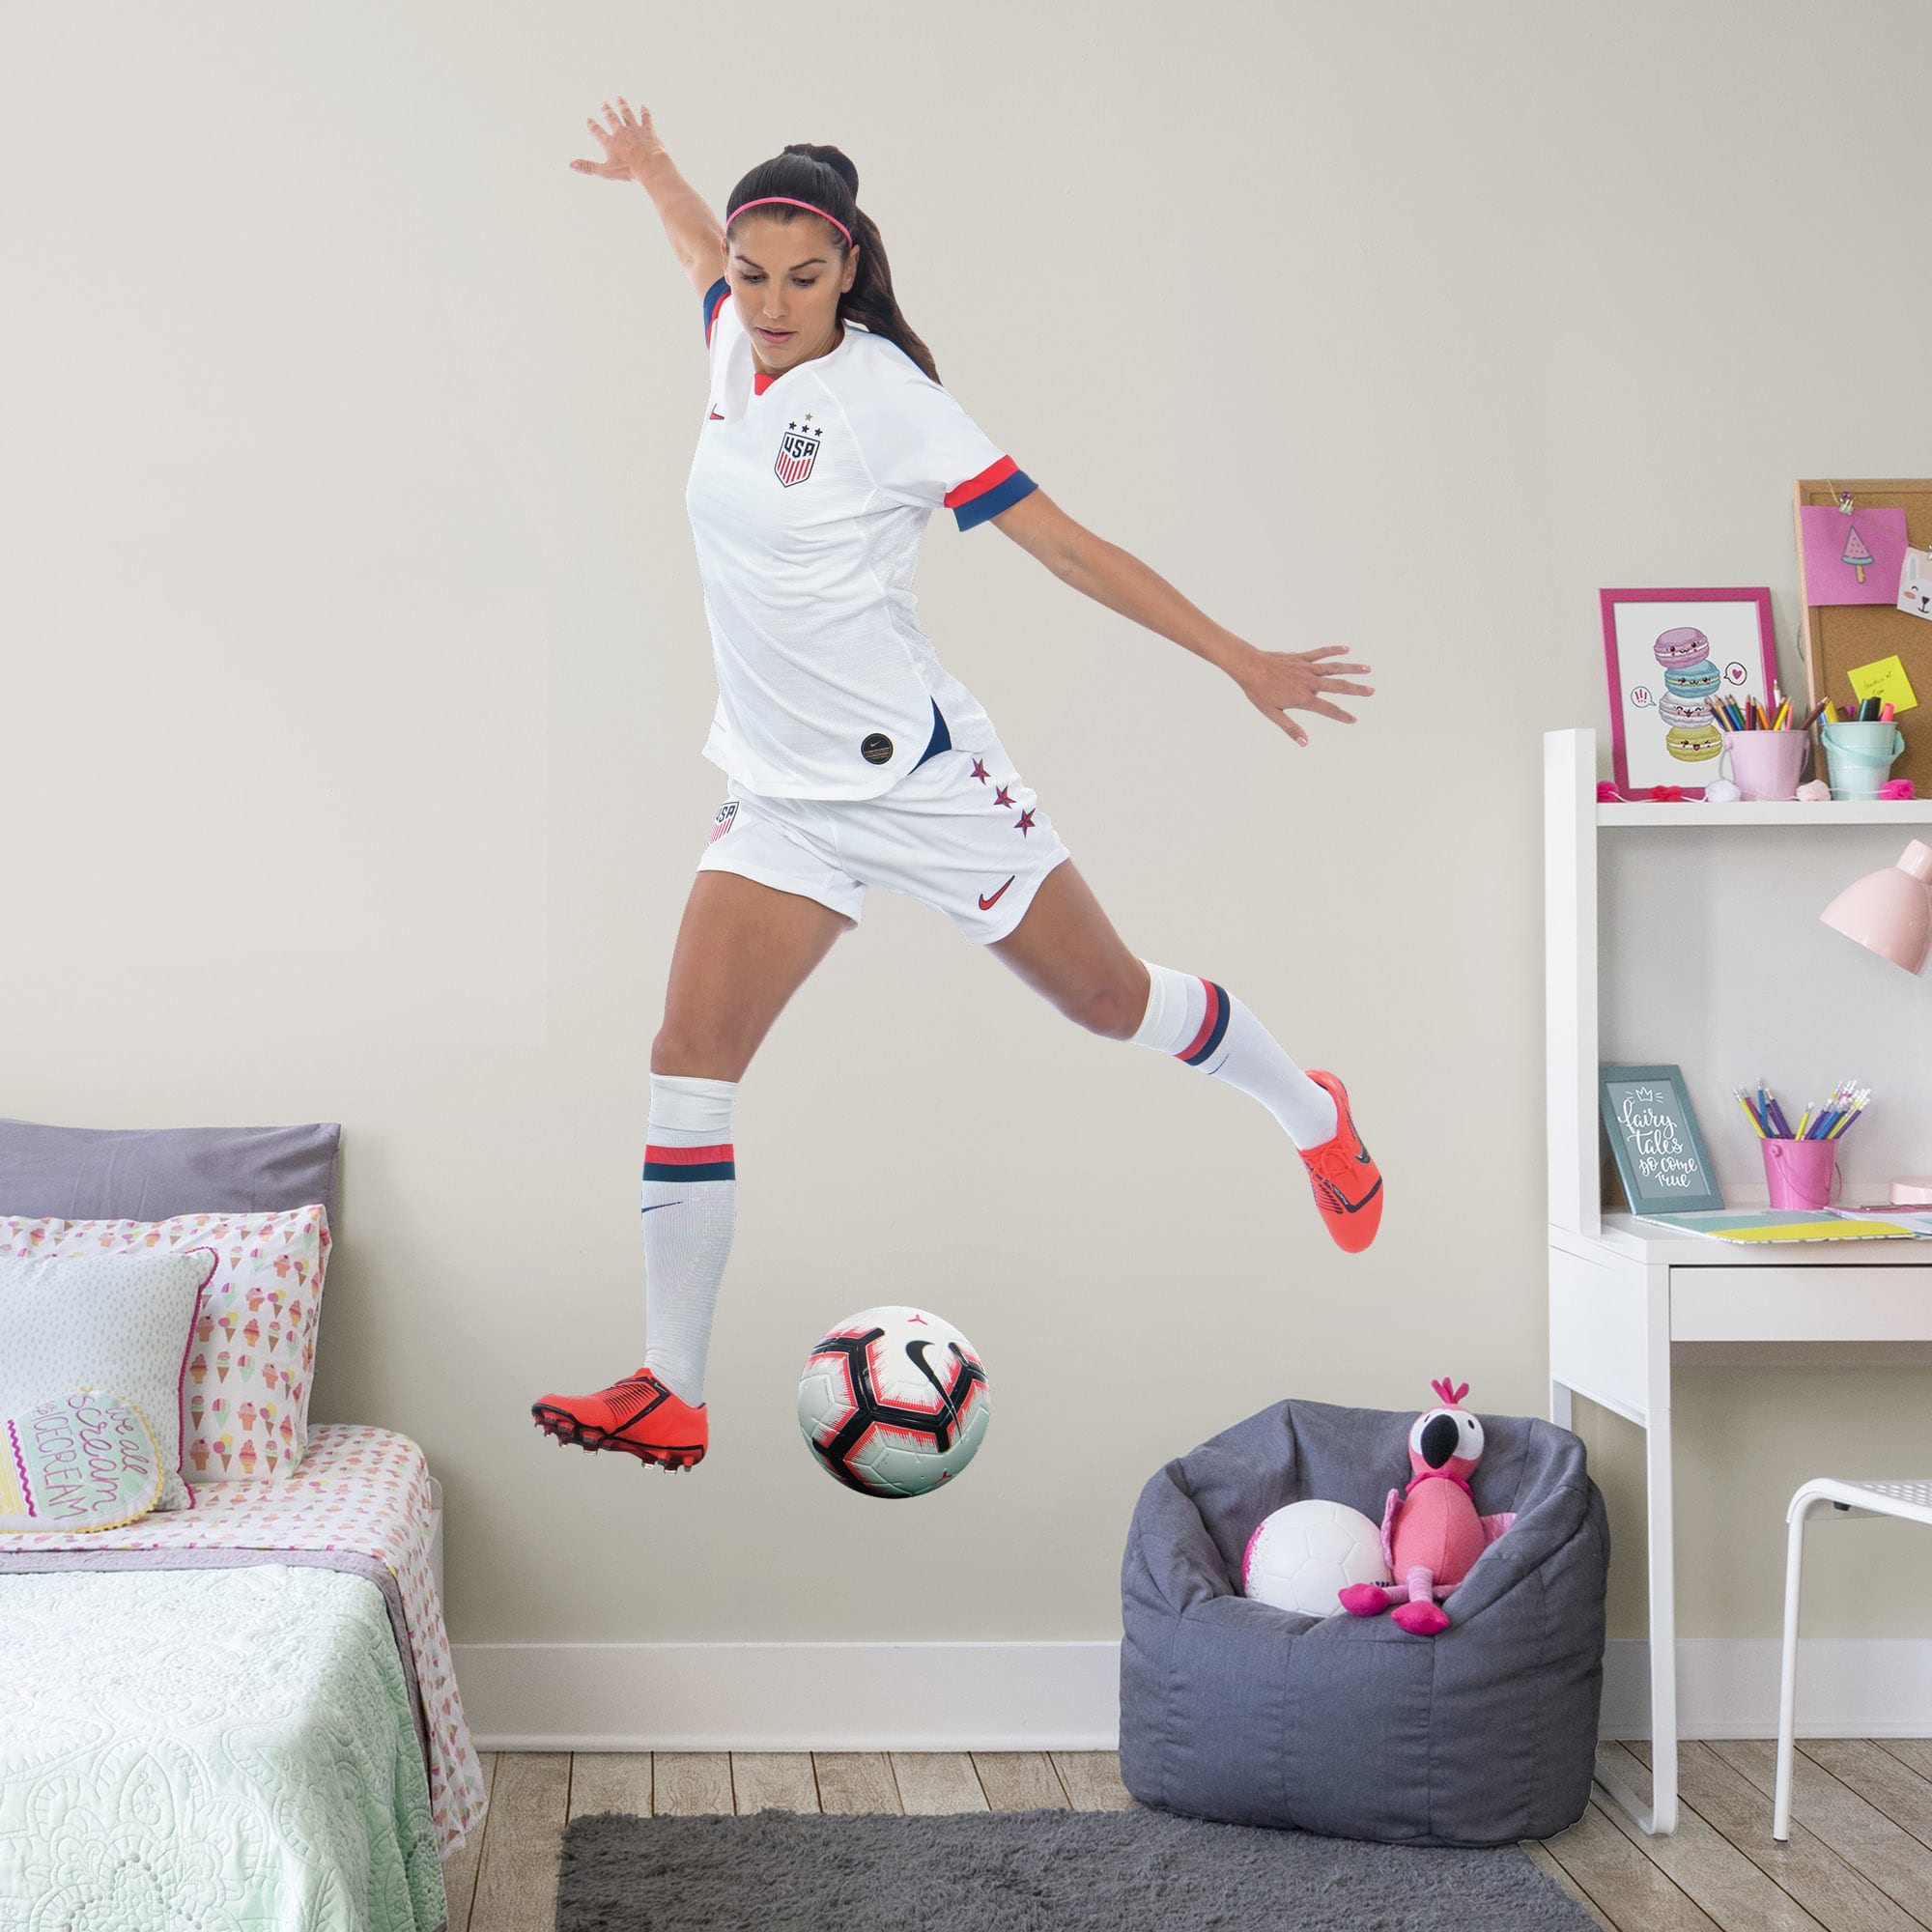 Alex Morgan: Striker - Officially Licensed Removable Wall Decal Giant Athlete + 2 Decals (31"W x 51"H) by Fathead | Vinyl